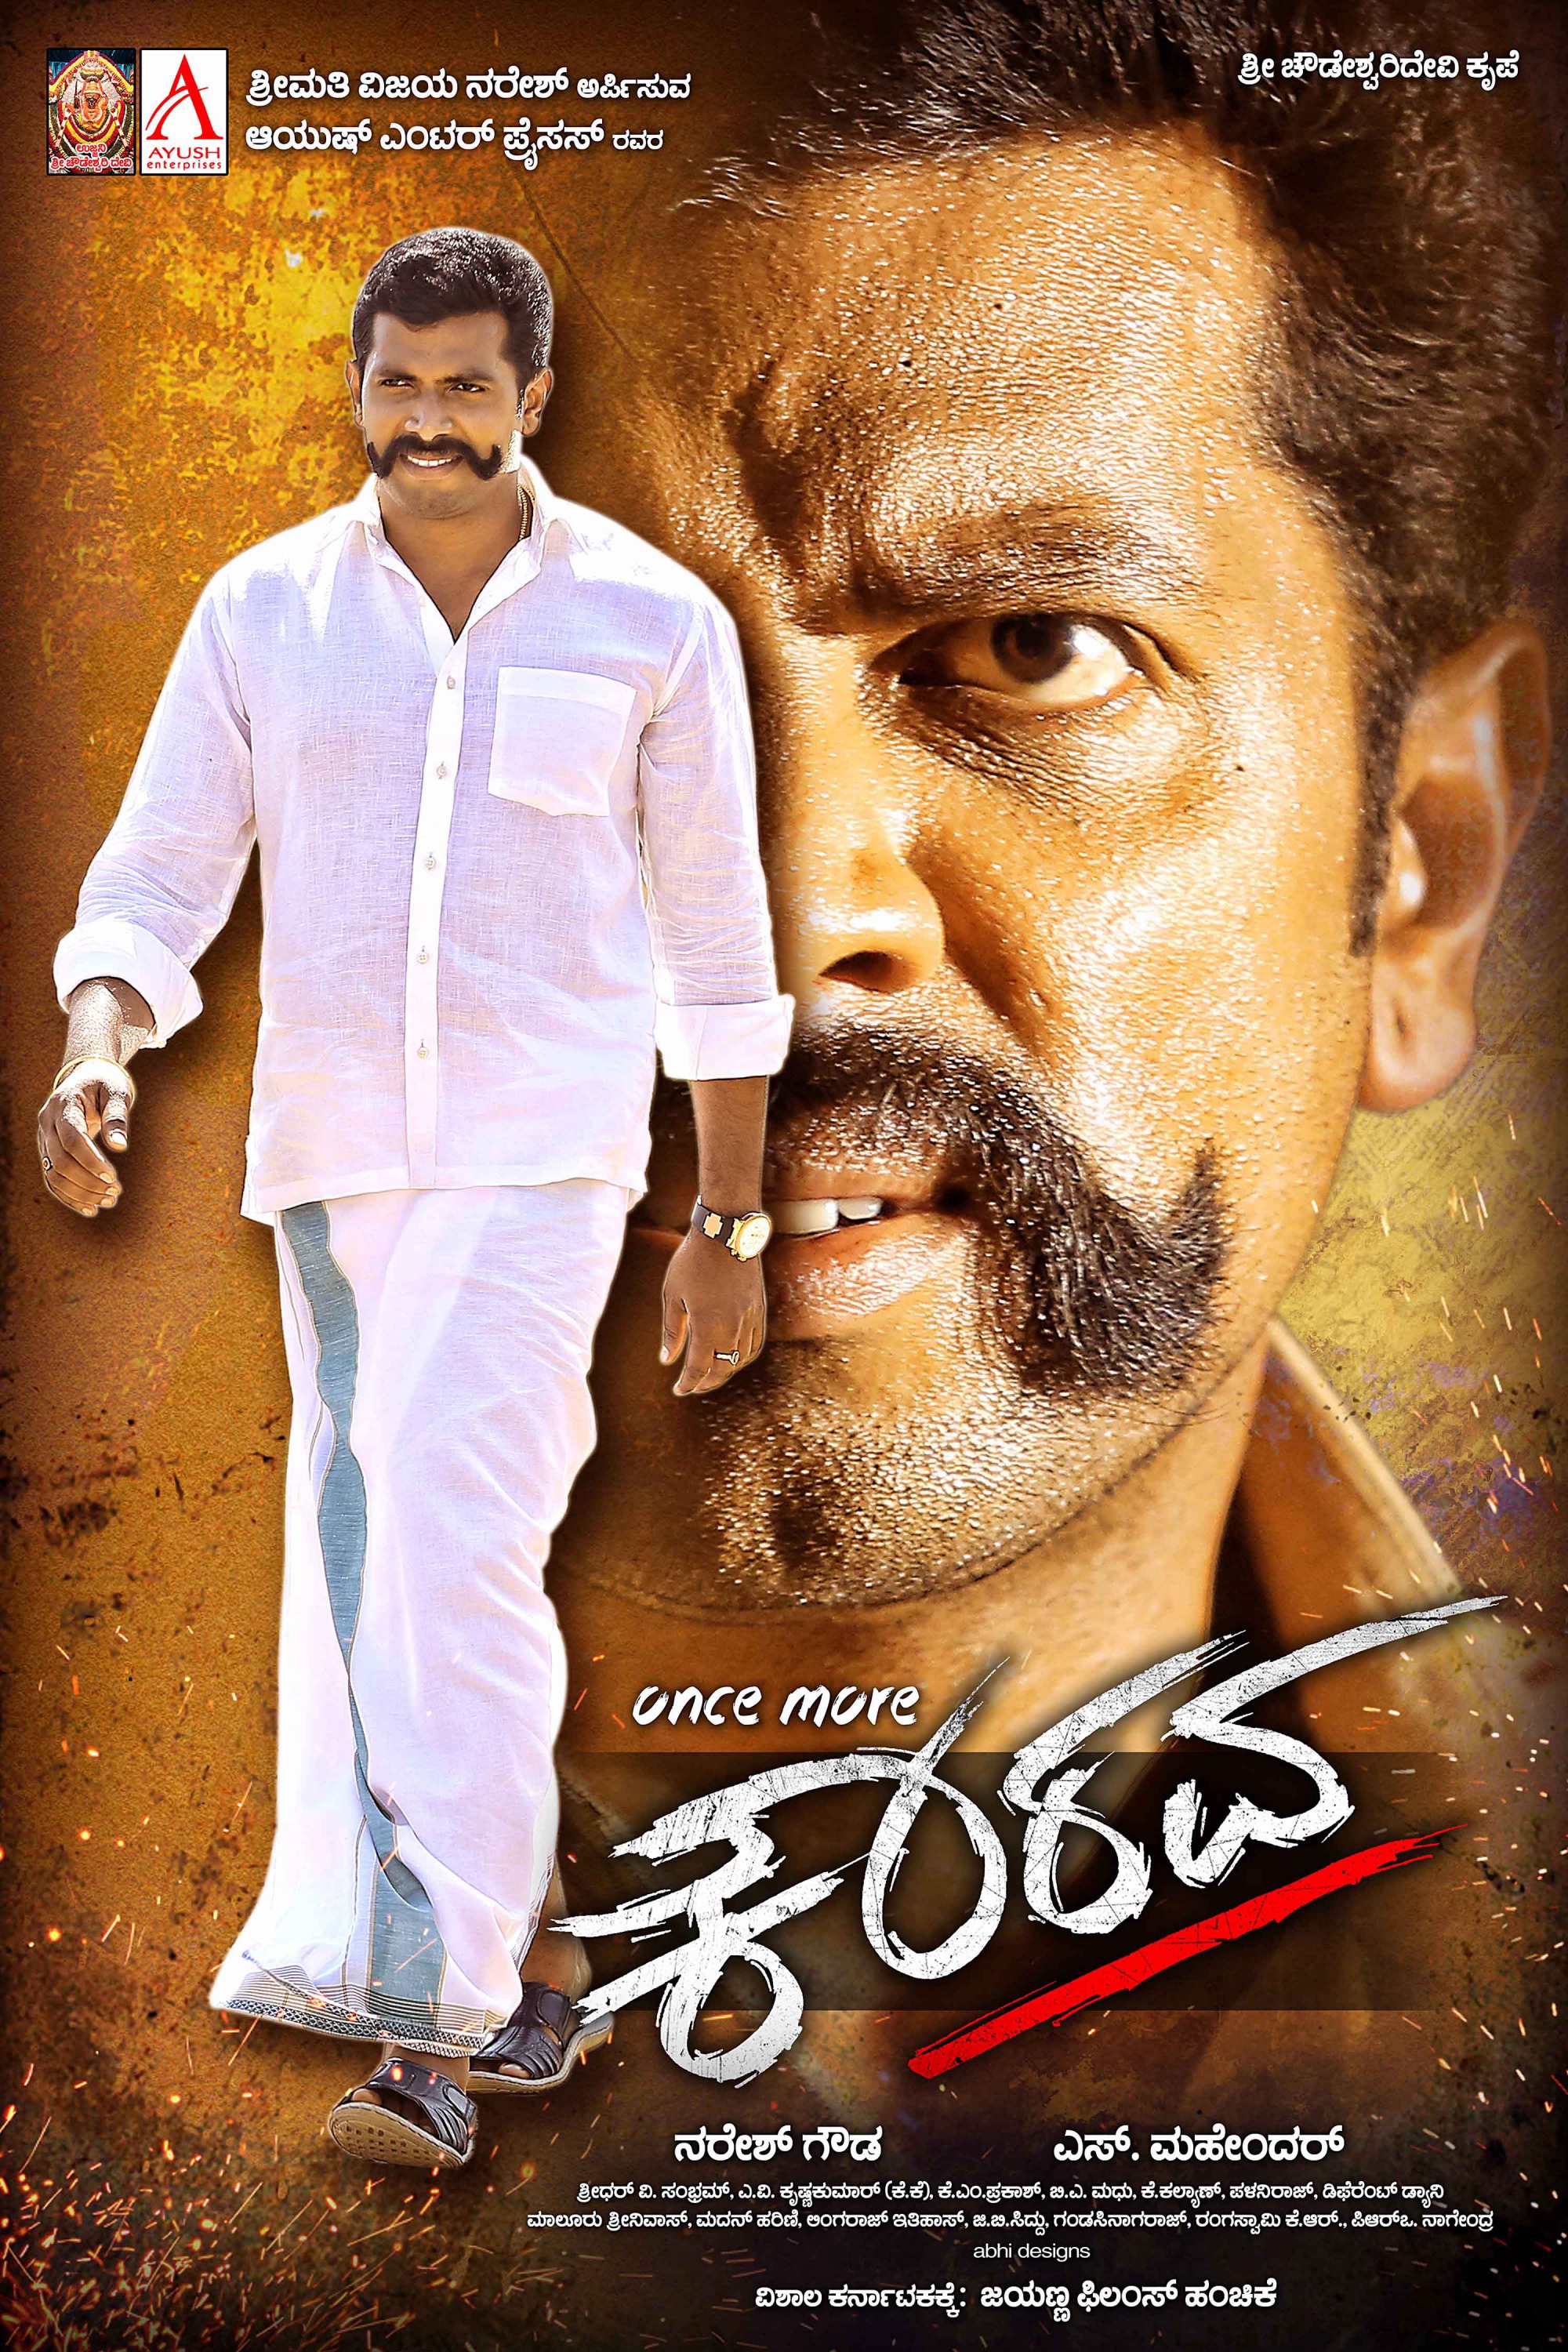 Mega Sized Movie Poster Image for Once More Kaurava (#16 of 20)